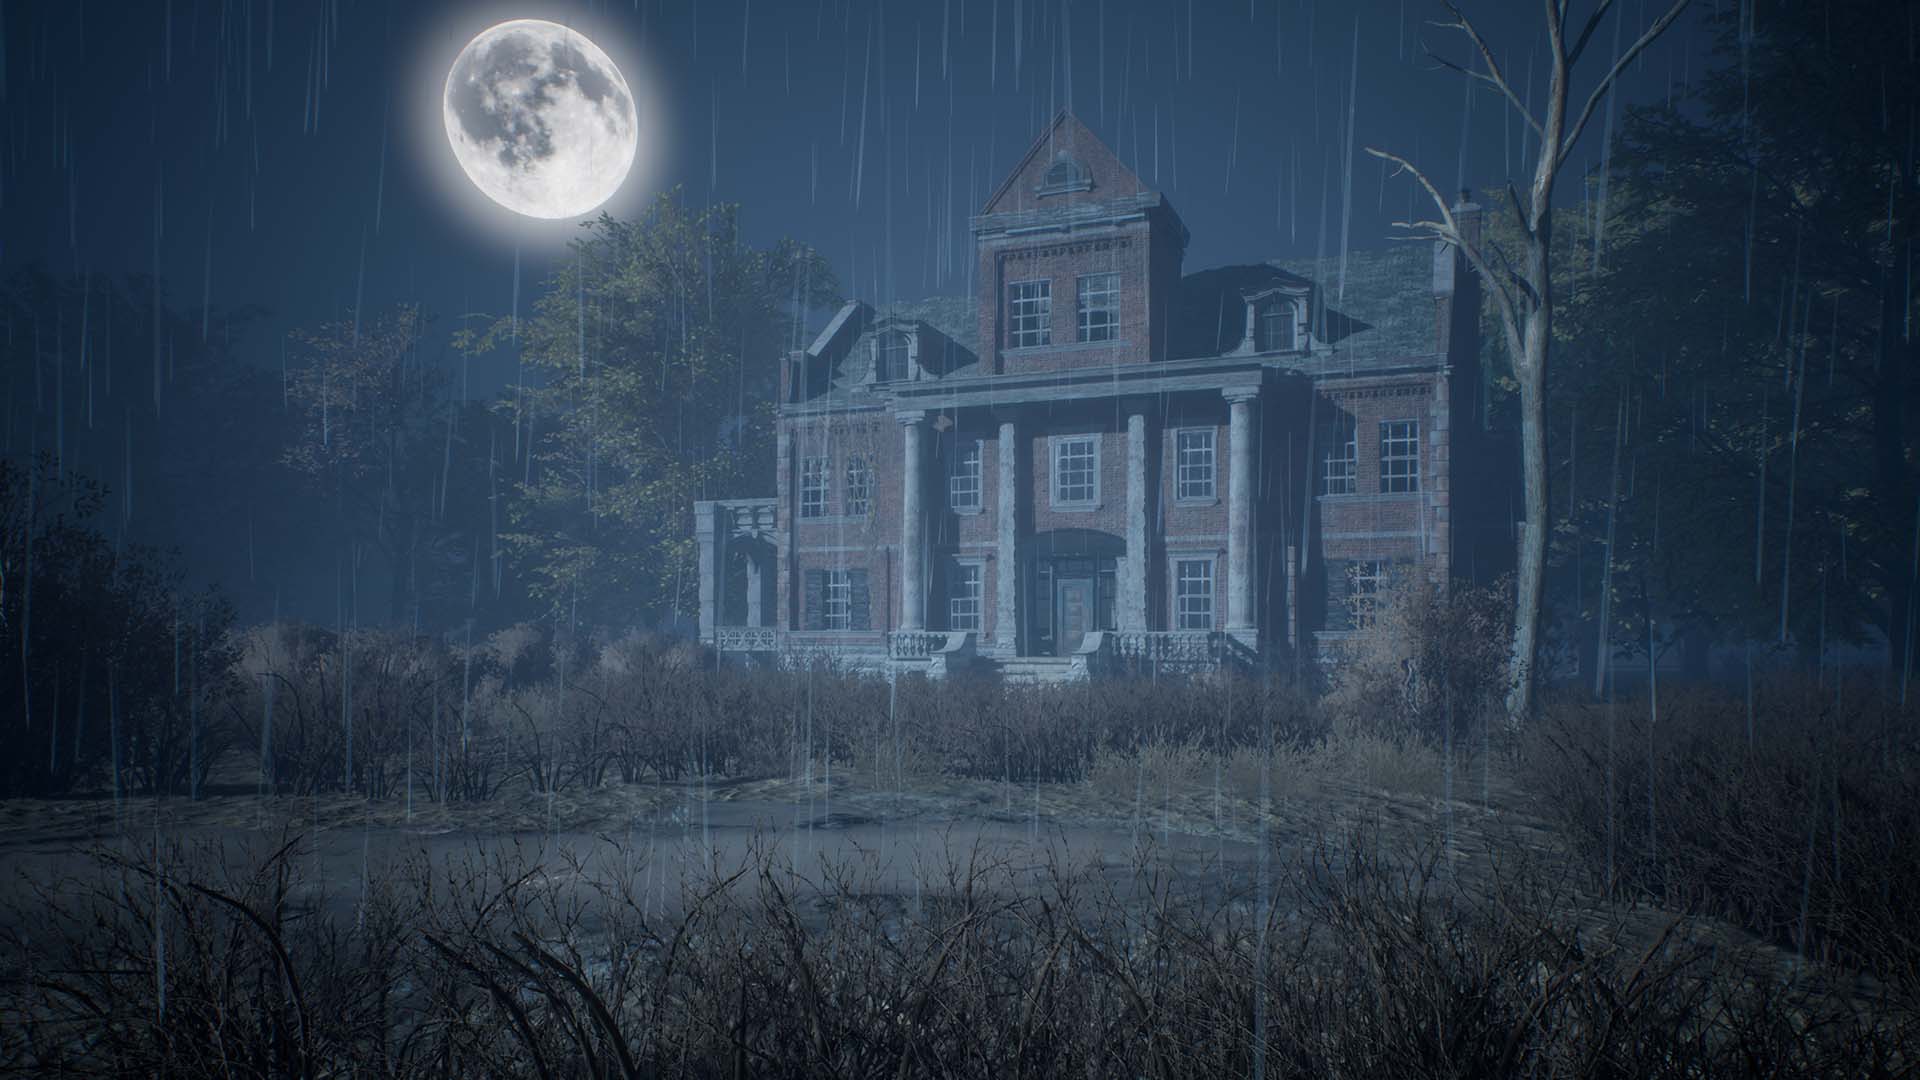 Haunted House - PlayStation 5